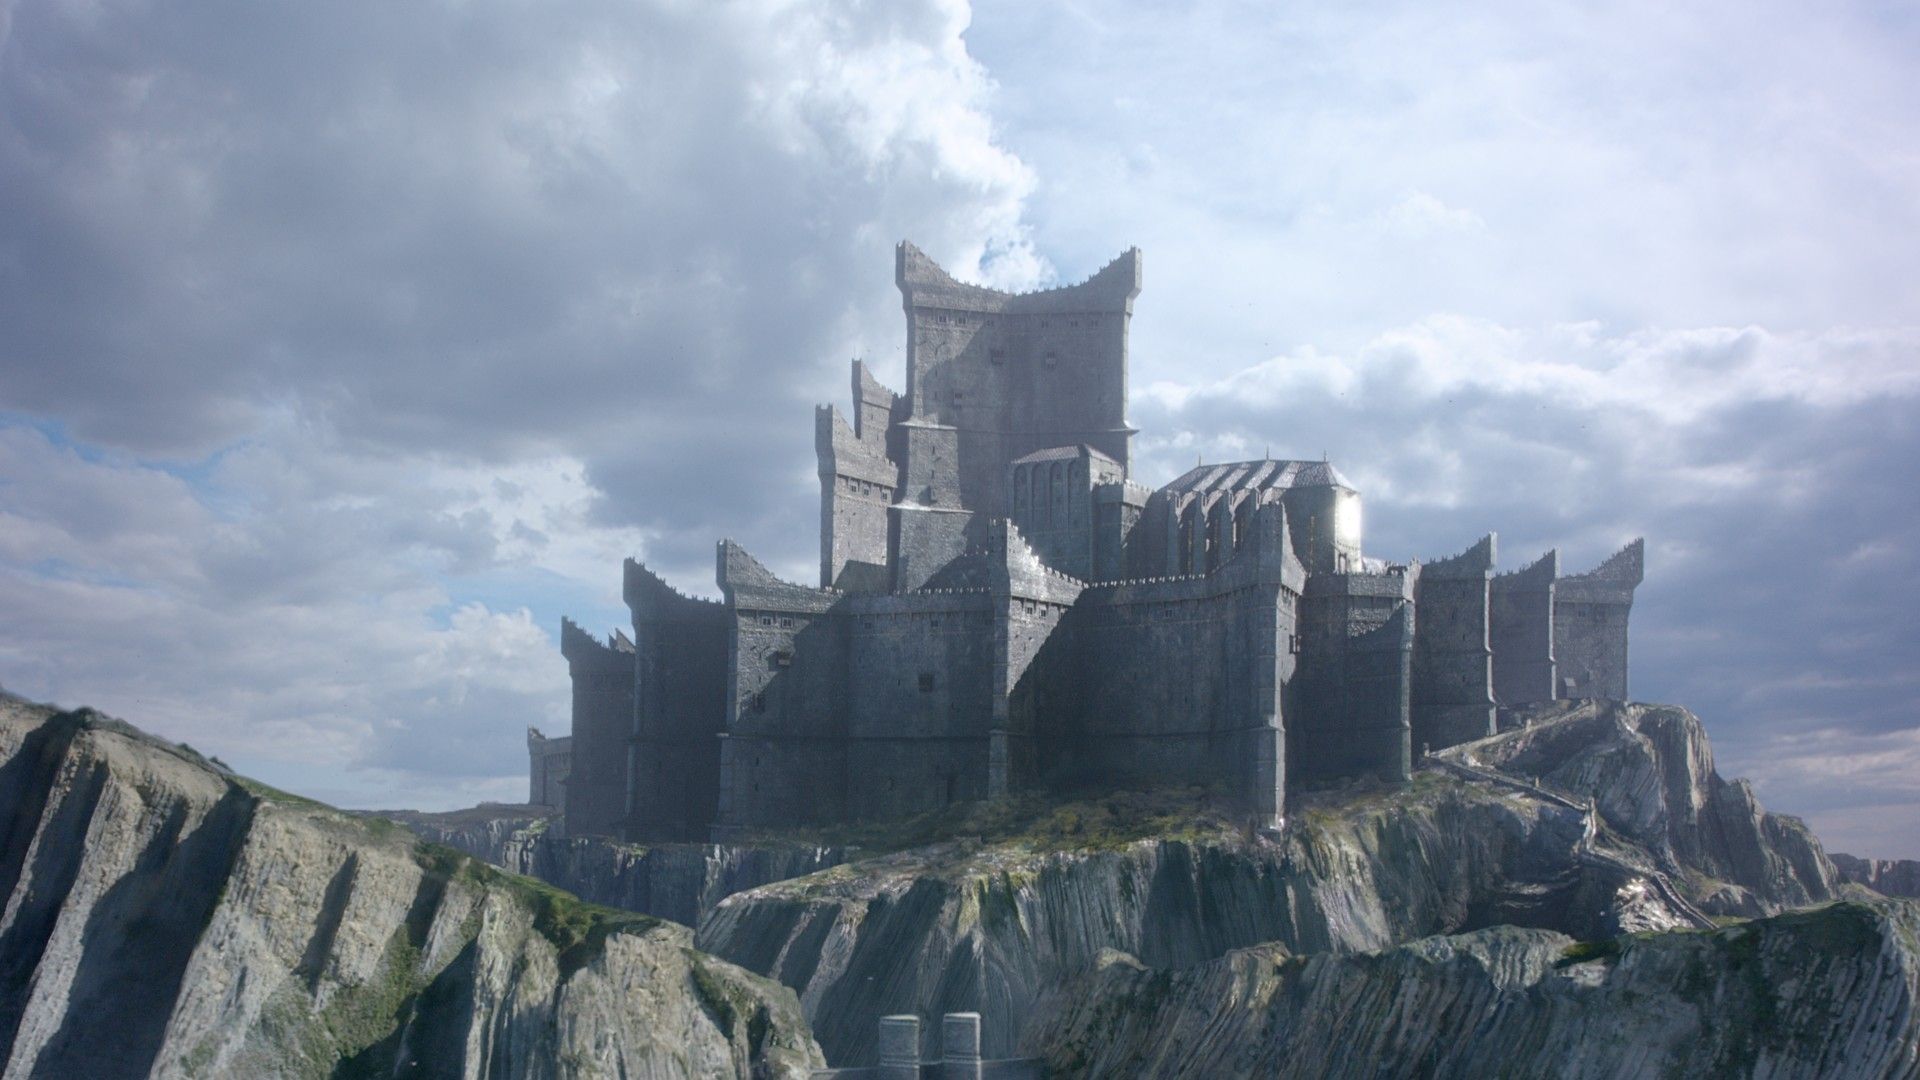 GameOfThrones 7 Mattepainting, Max Riess. Game of thrones castles, Game of thrones locations, Dragonstone castle